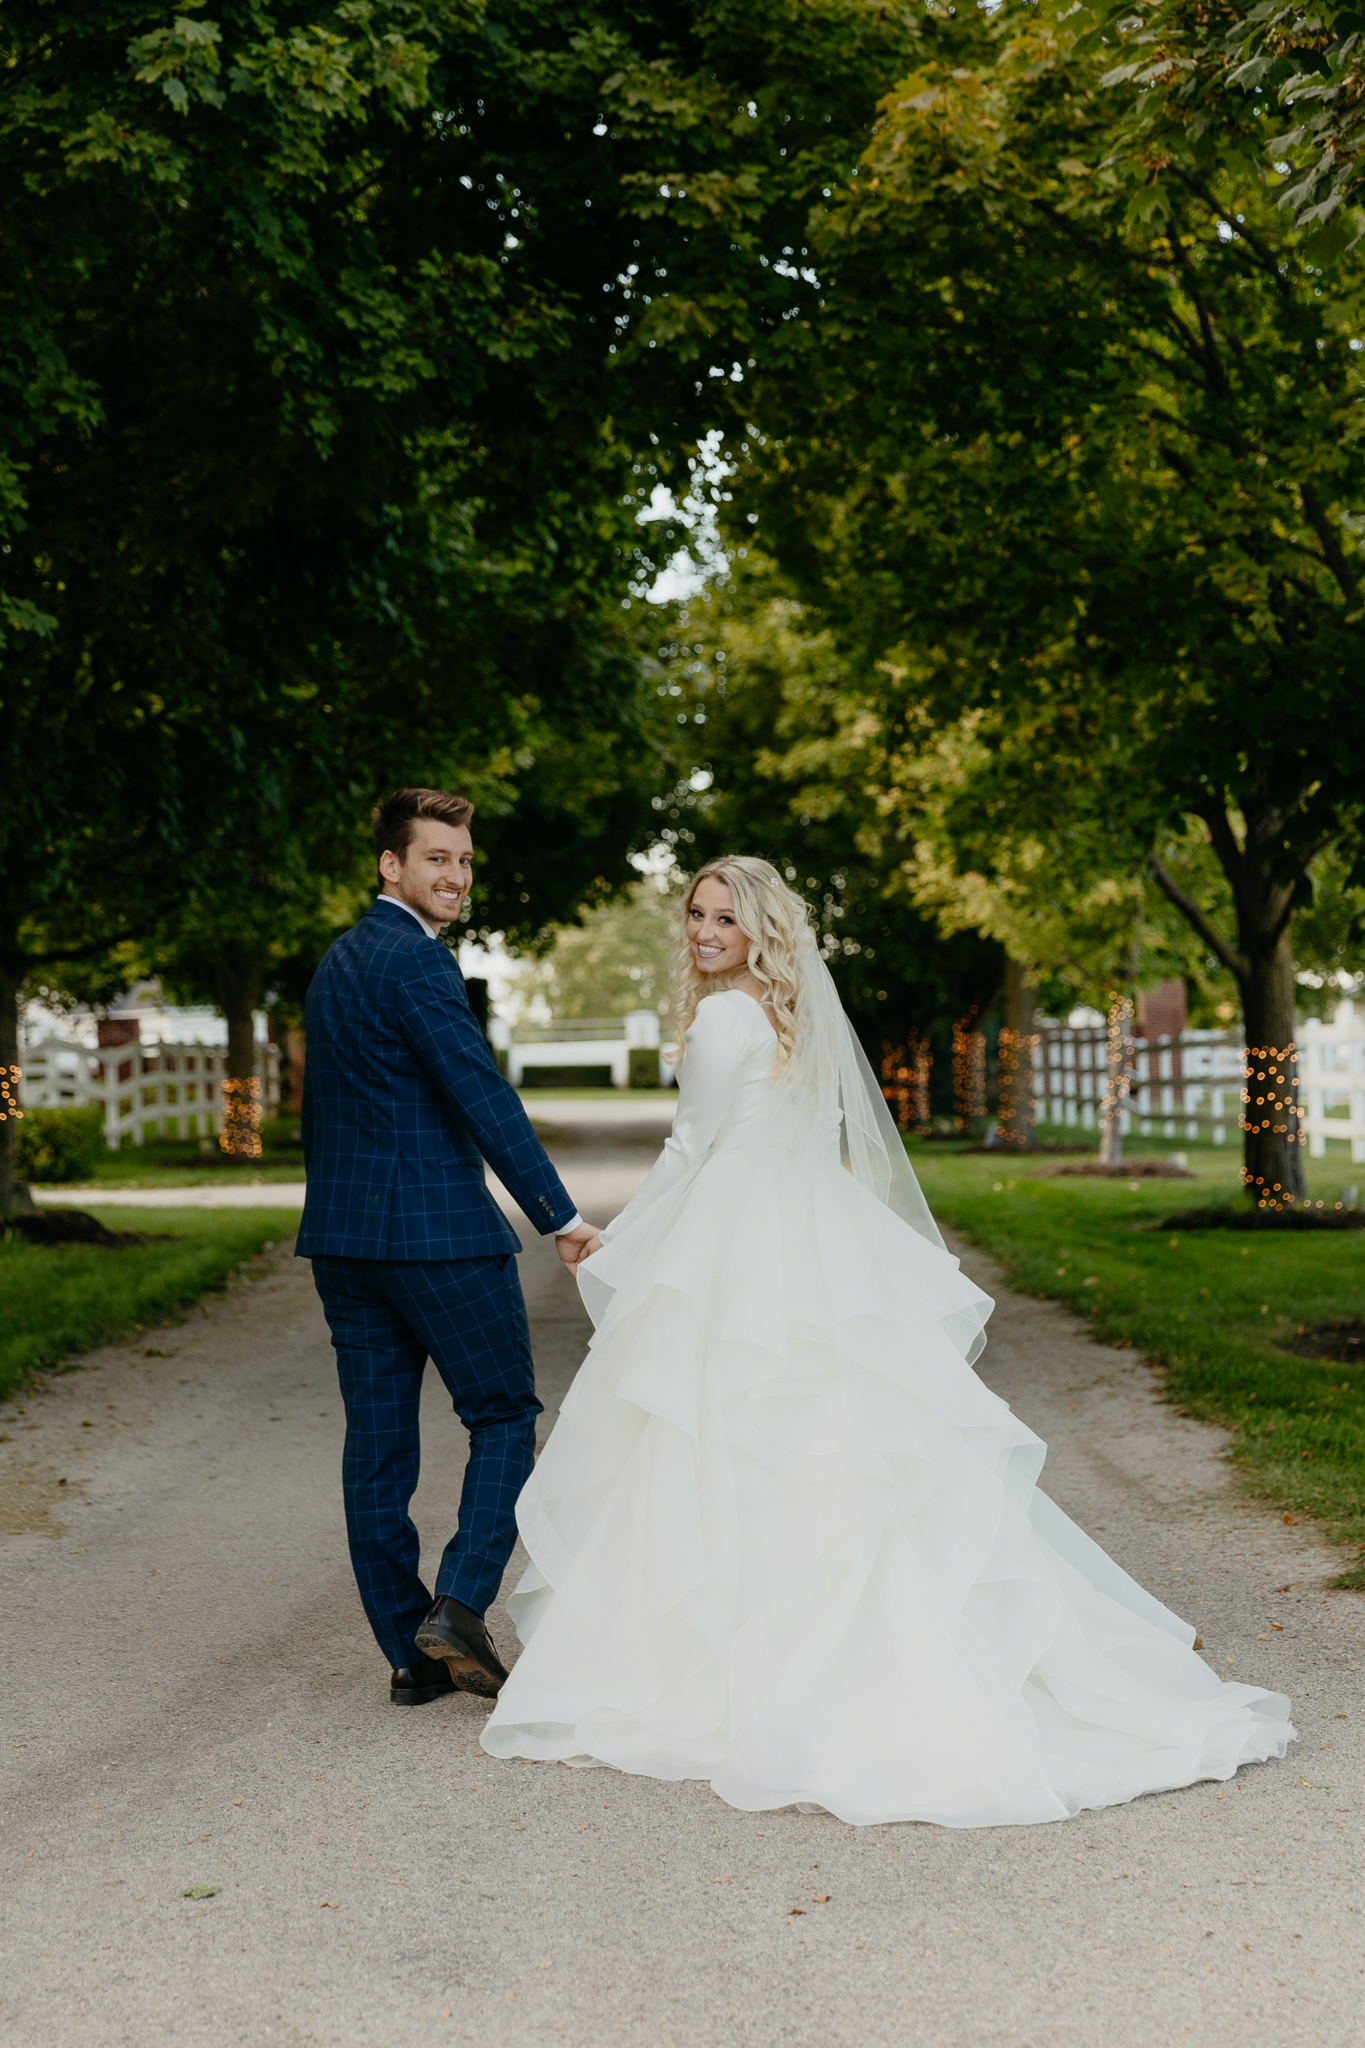 Bride and groom walk down tree lined driveway hand in hand while looking back